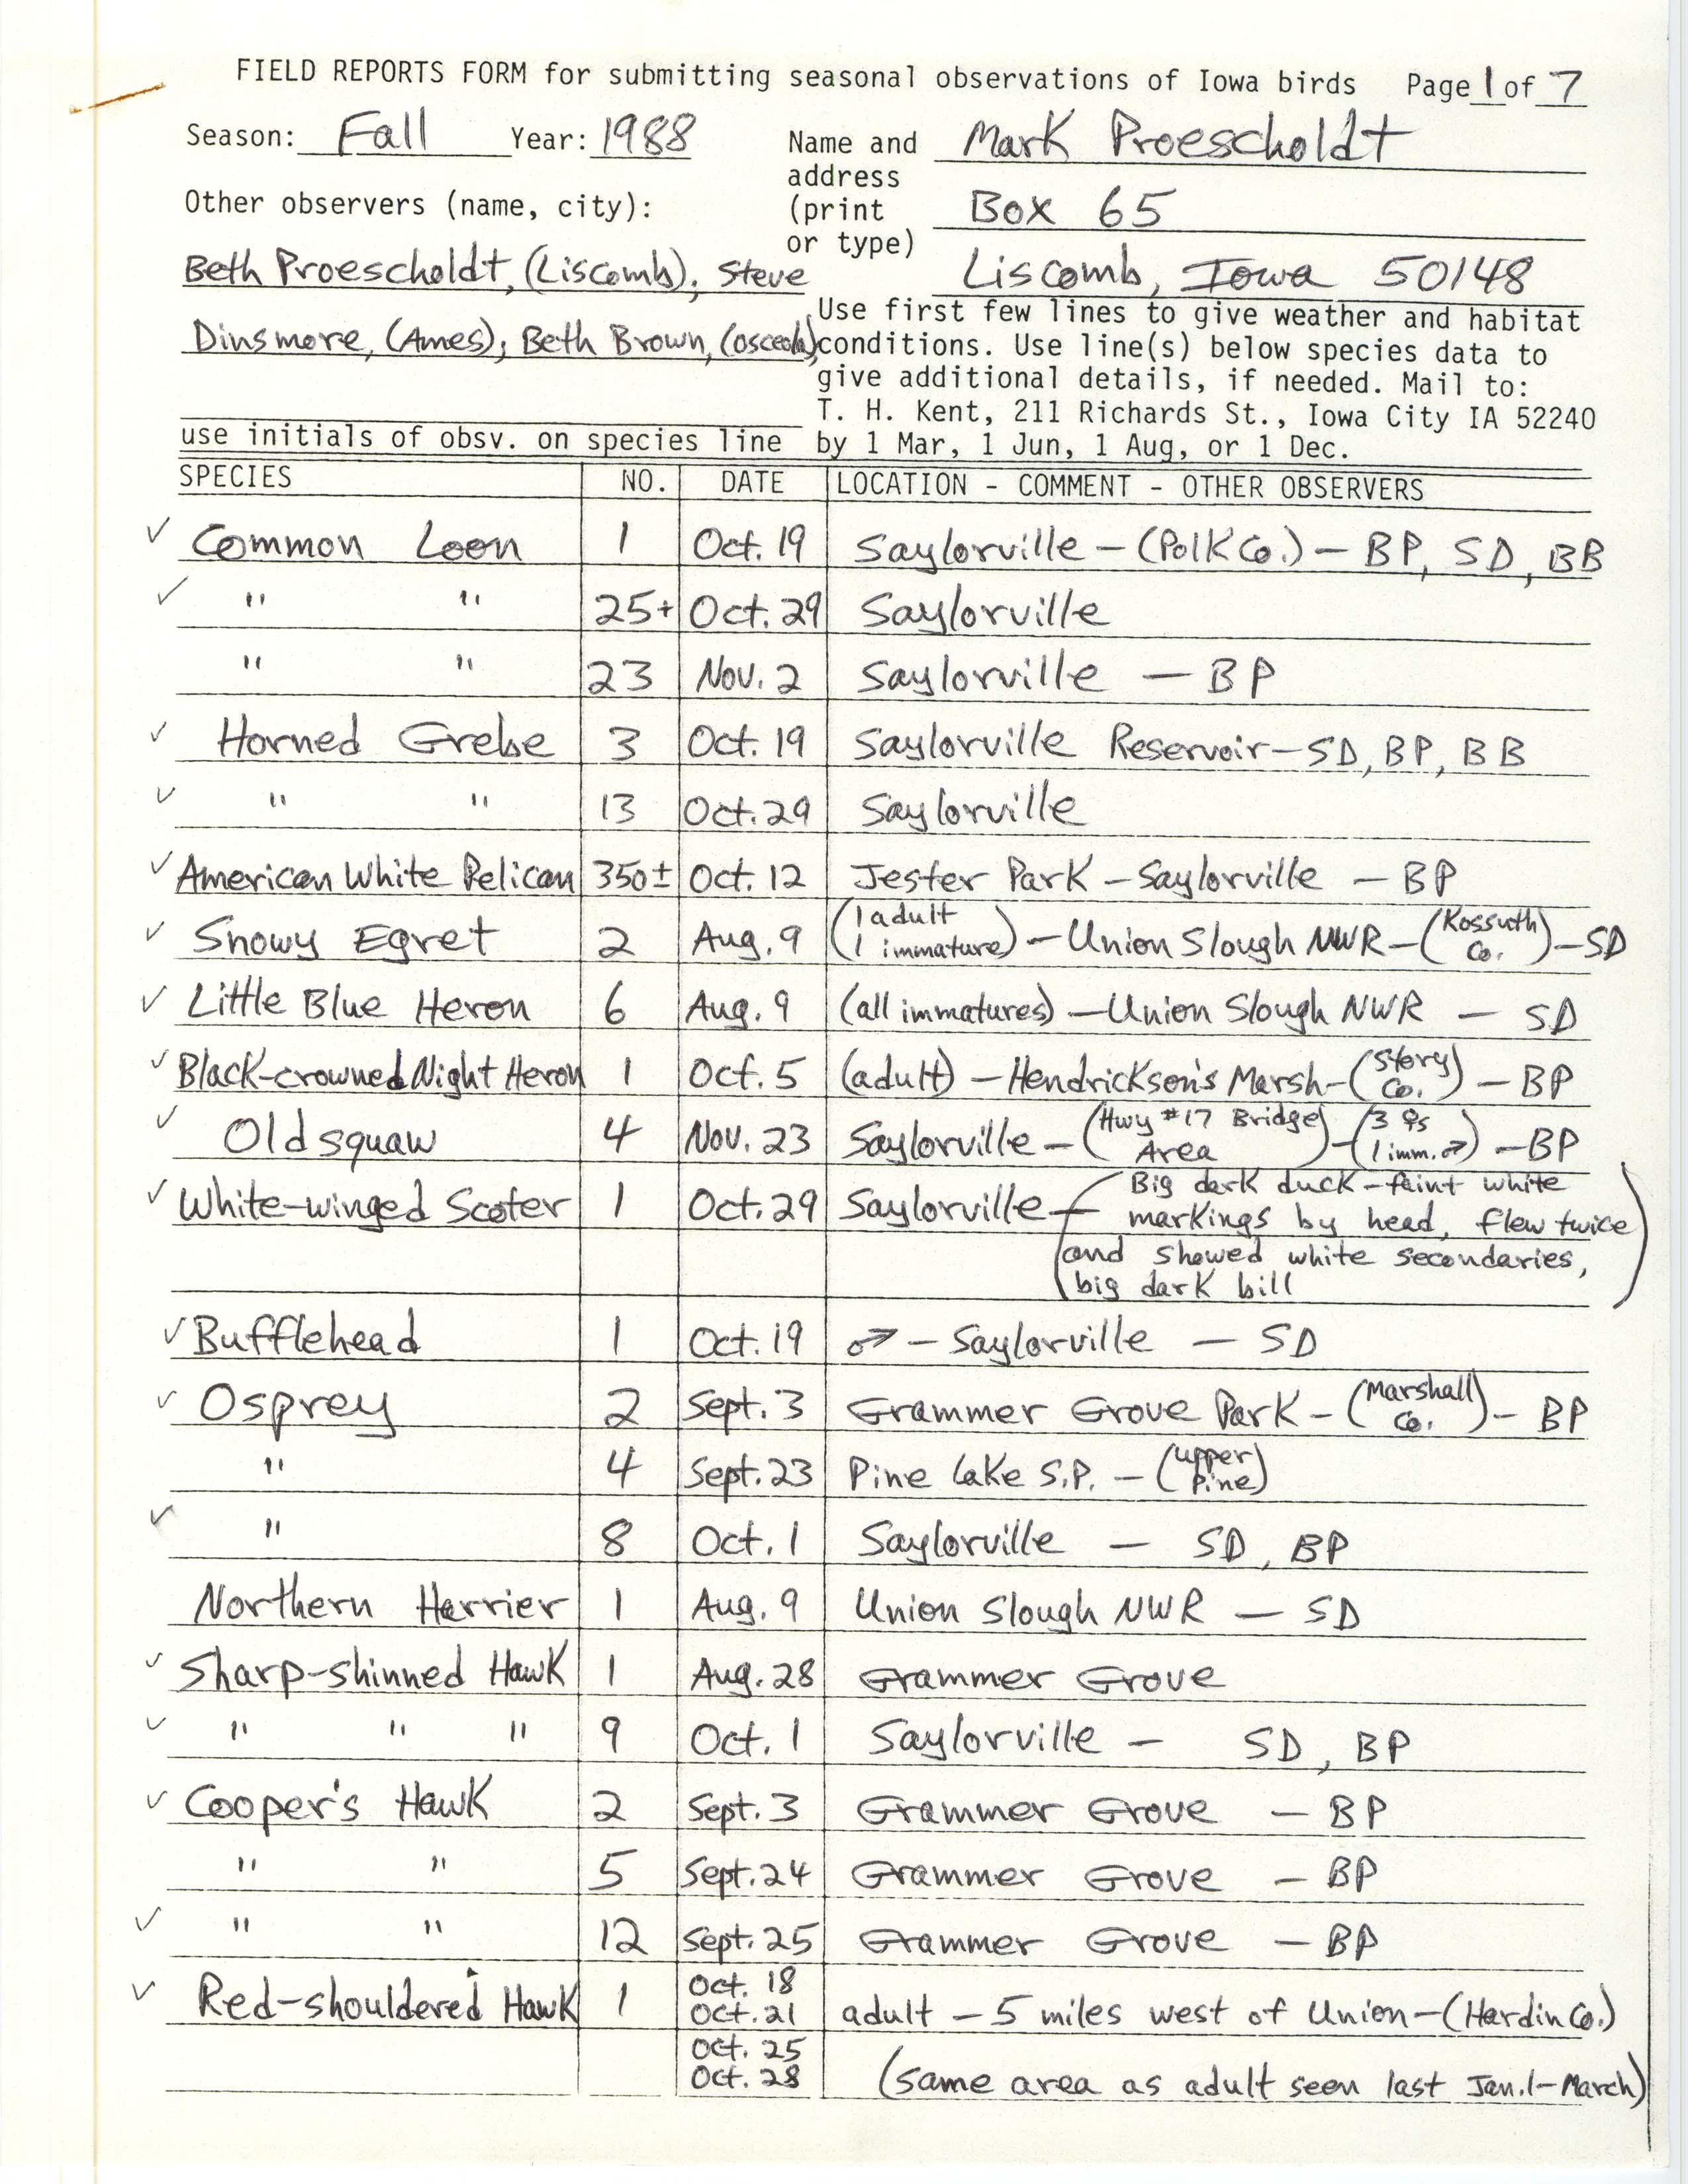 Field reports form for submitting seasonal observations of Iowa birds, Mark Proescholdt, fall 1988